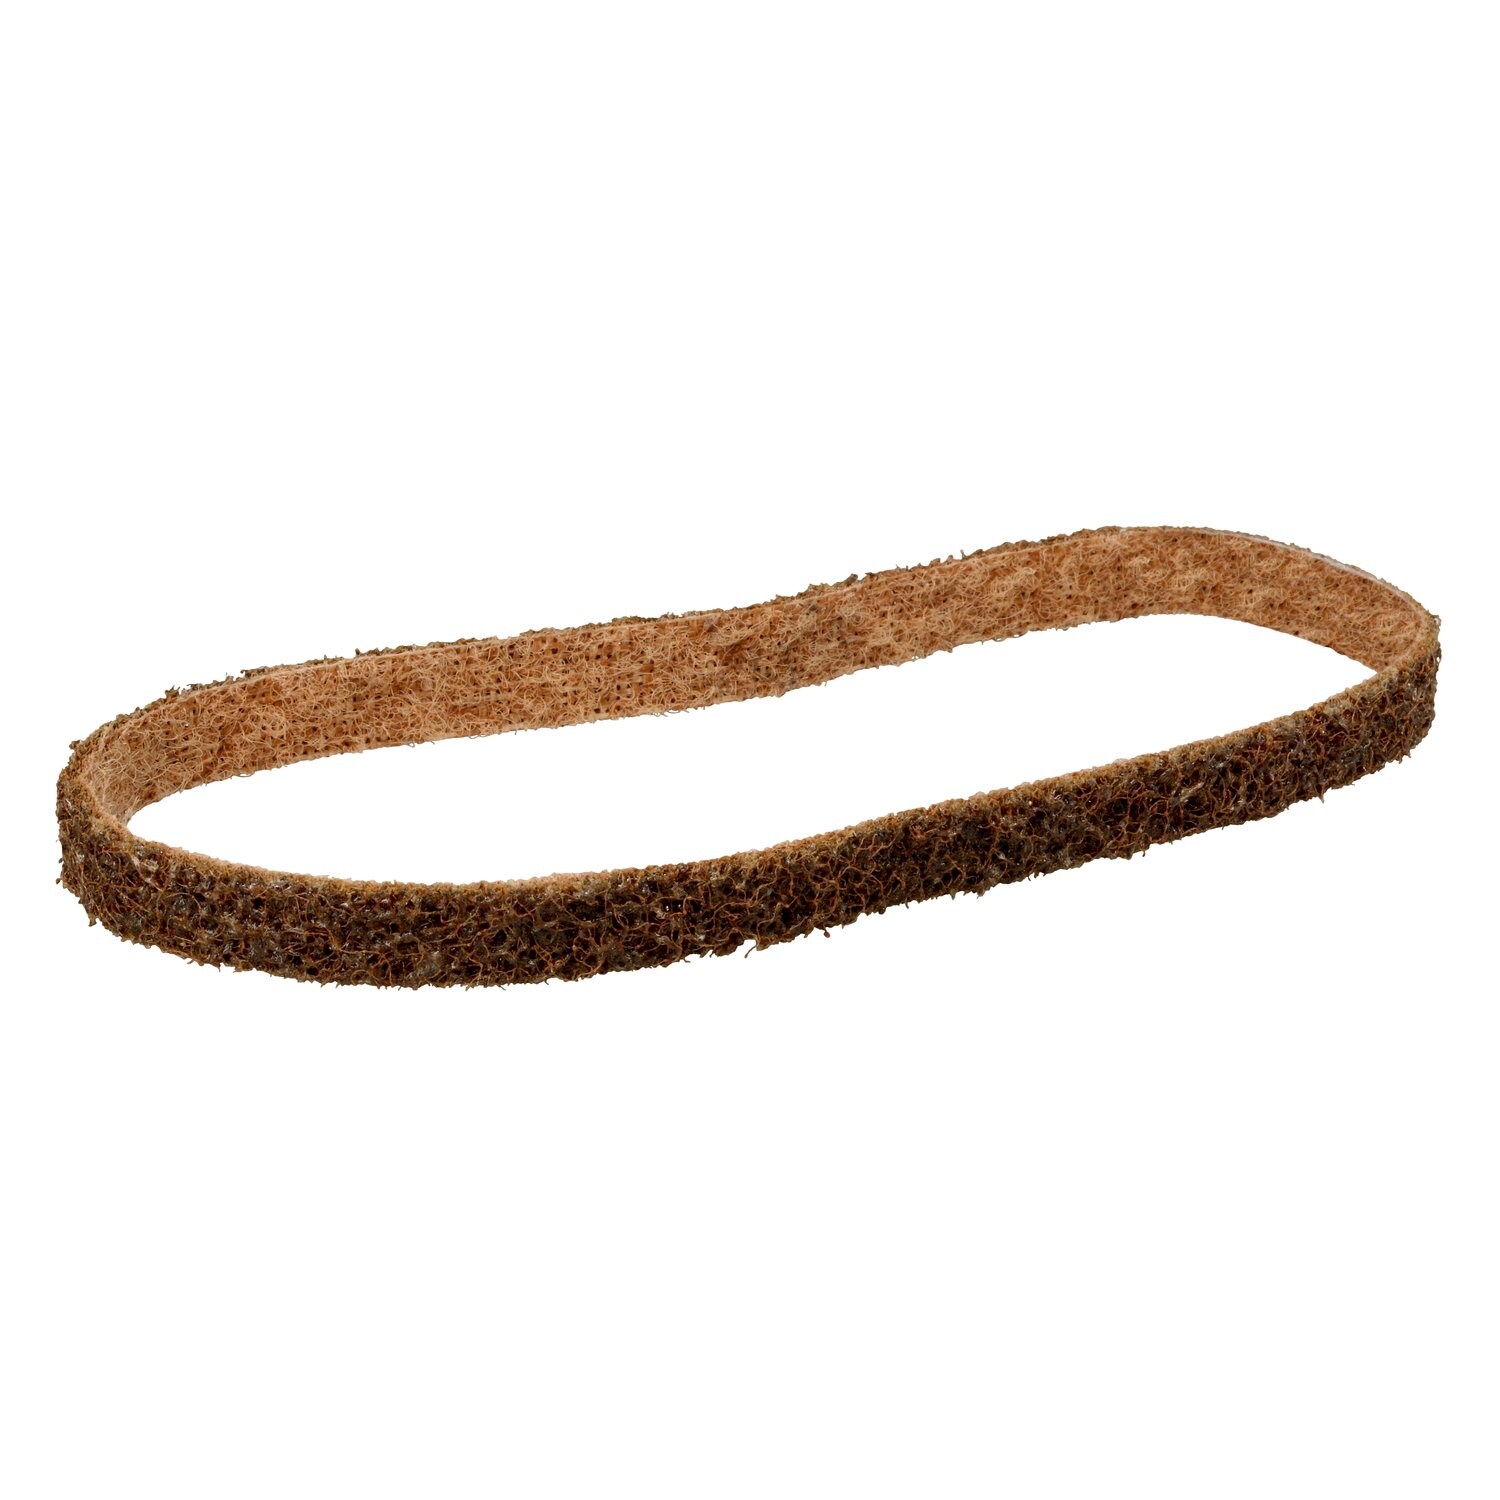 7010365291 - Scotch-Brite Surface Conditioning Belt, 1/2 in x 30 in, A CRS, 20
ea/Case